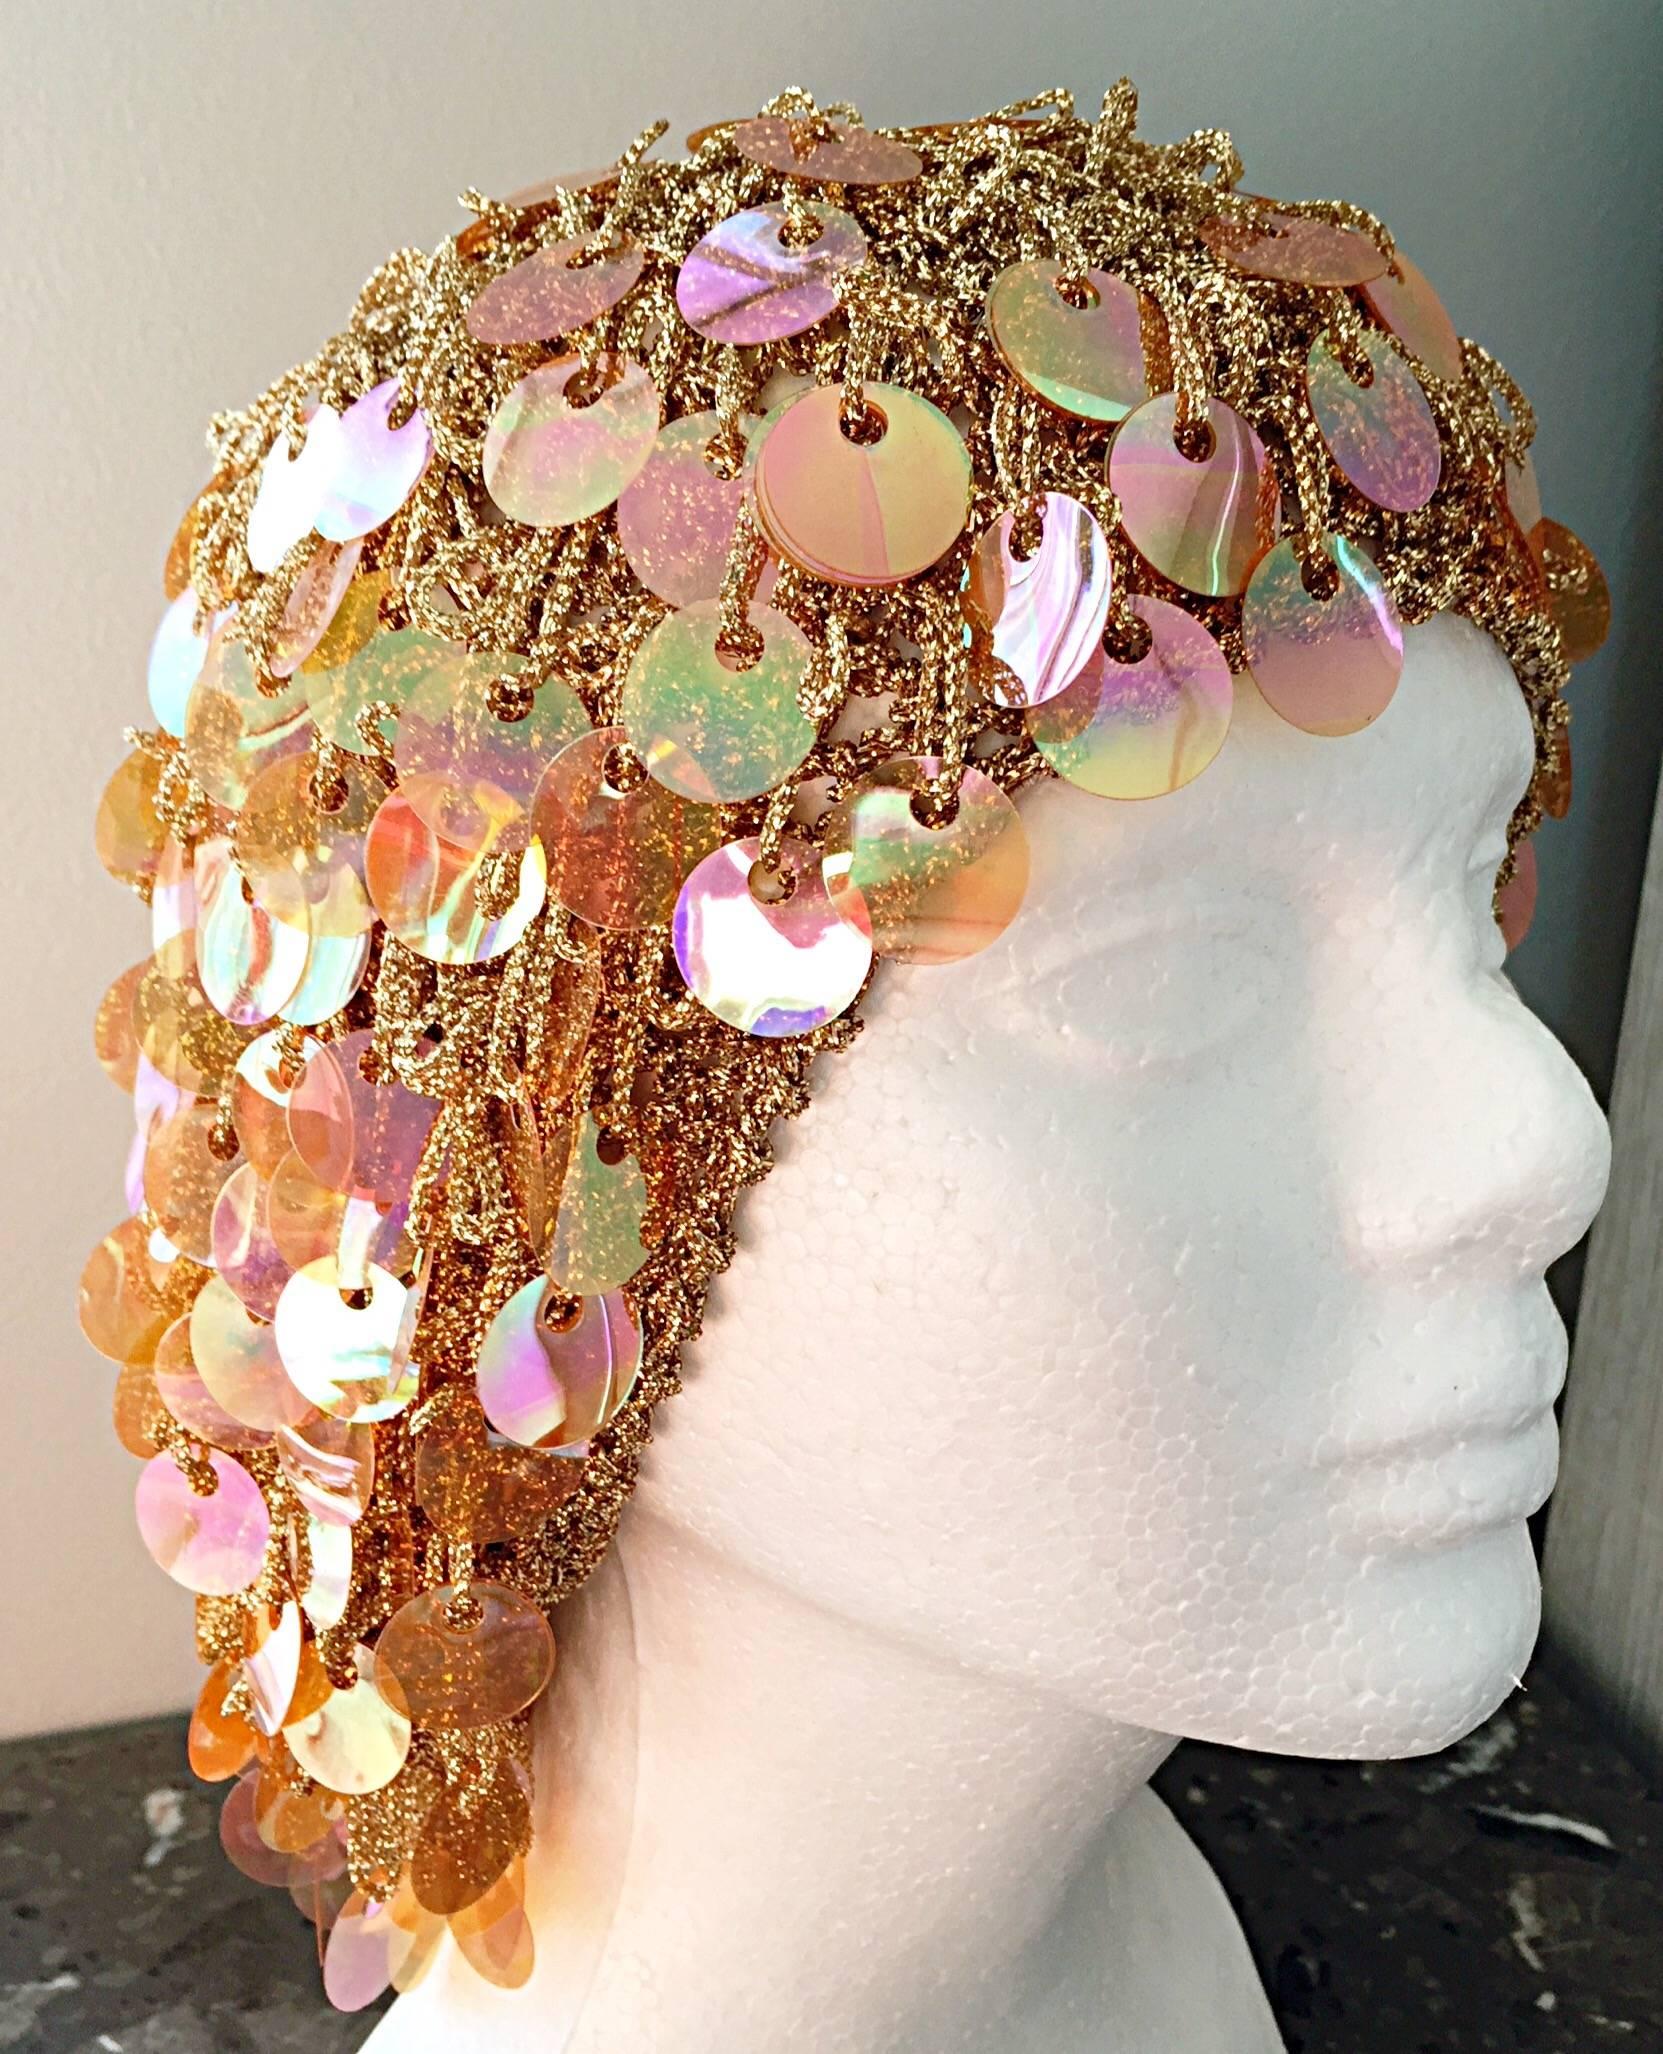 Incredible vintage 70s hat! Encrusted with hundreds of metallic paillettes throughout. All hand made in Italy. Gold metallic threading. Looks amazing on! Can easily be worn casually, or dressed up. Great with jeans, shorts, or a dress. In great,